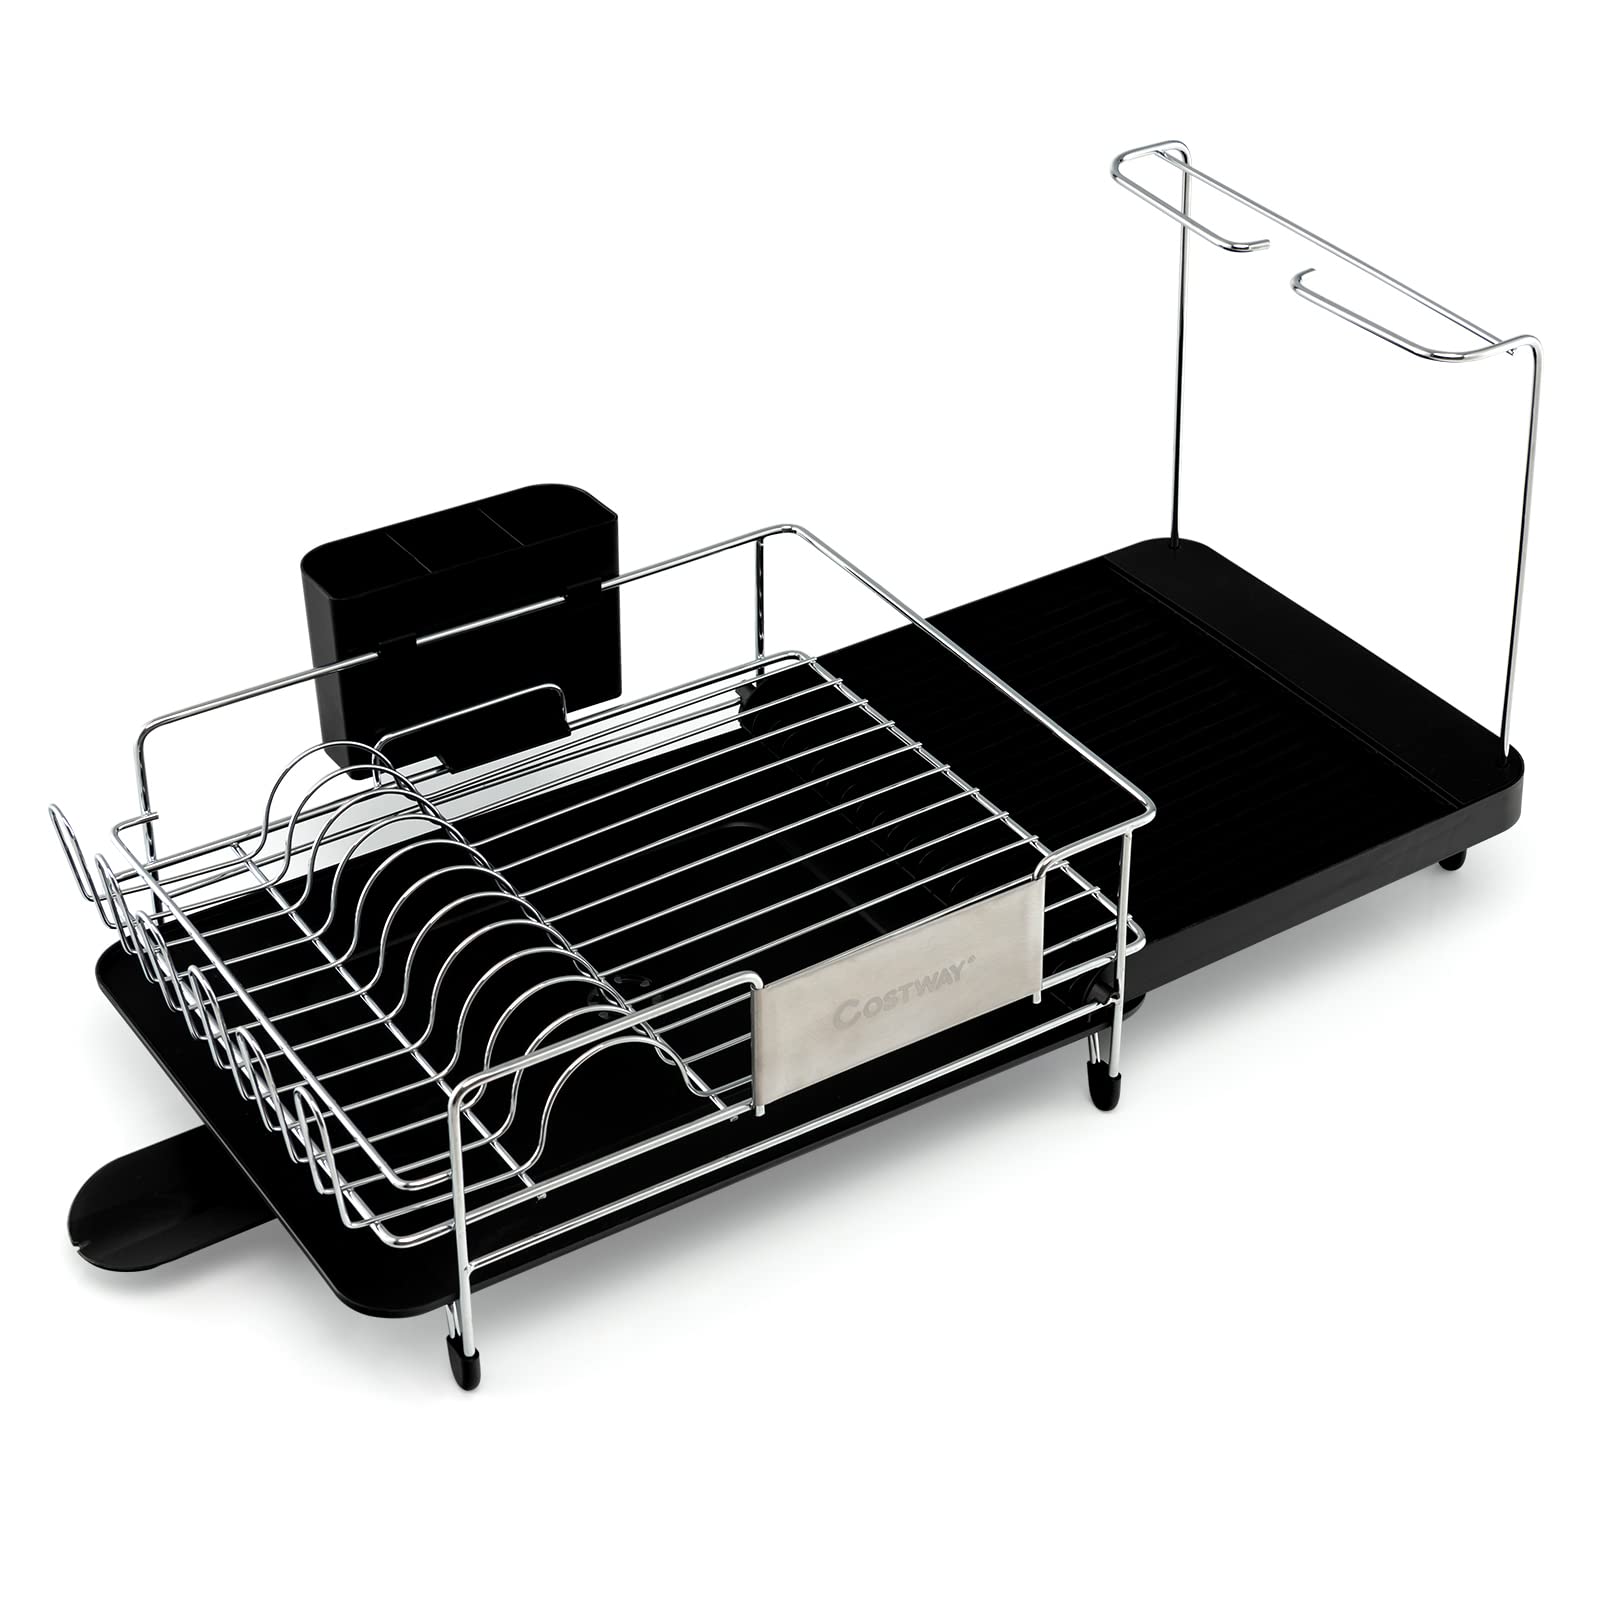 Giantex Stainless Steel Dish Rack, Expandable Dish Drainer Rack with Cutlery Cup Glass Holder